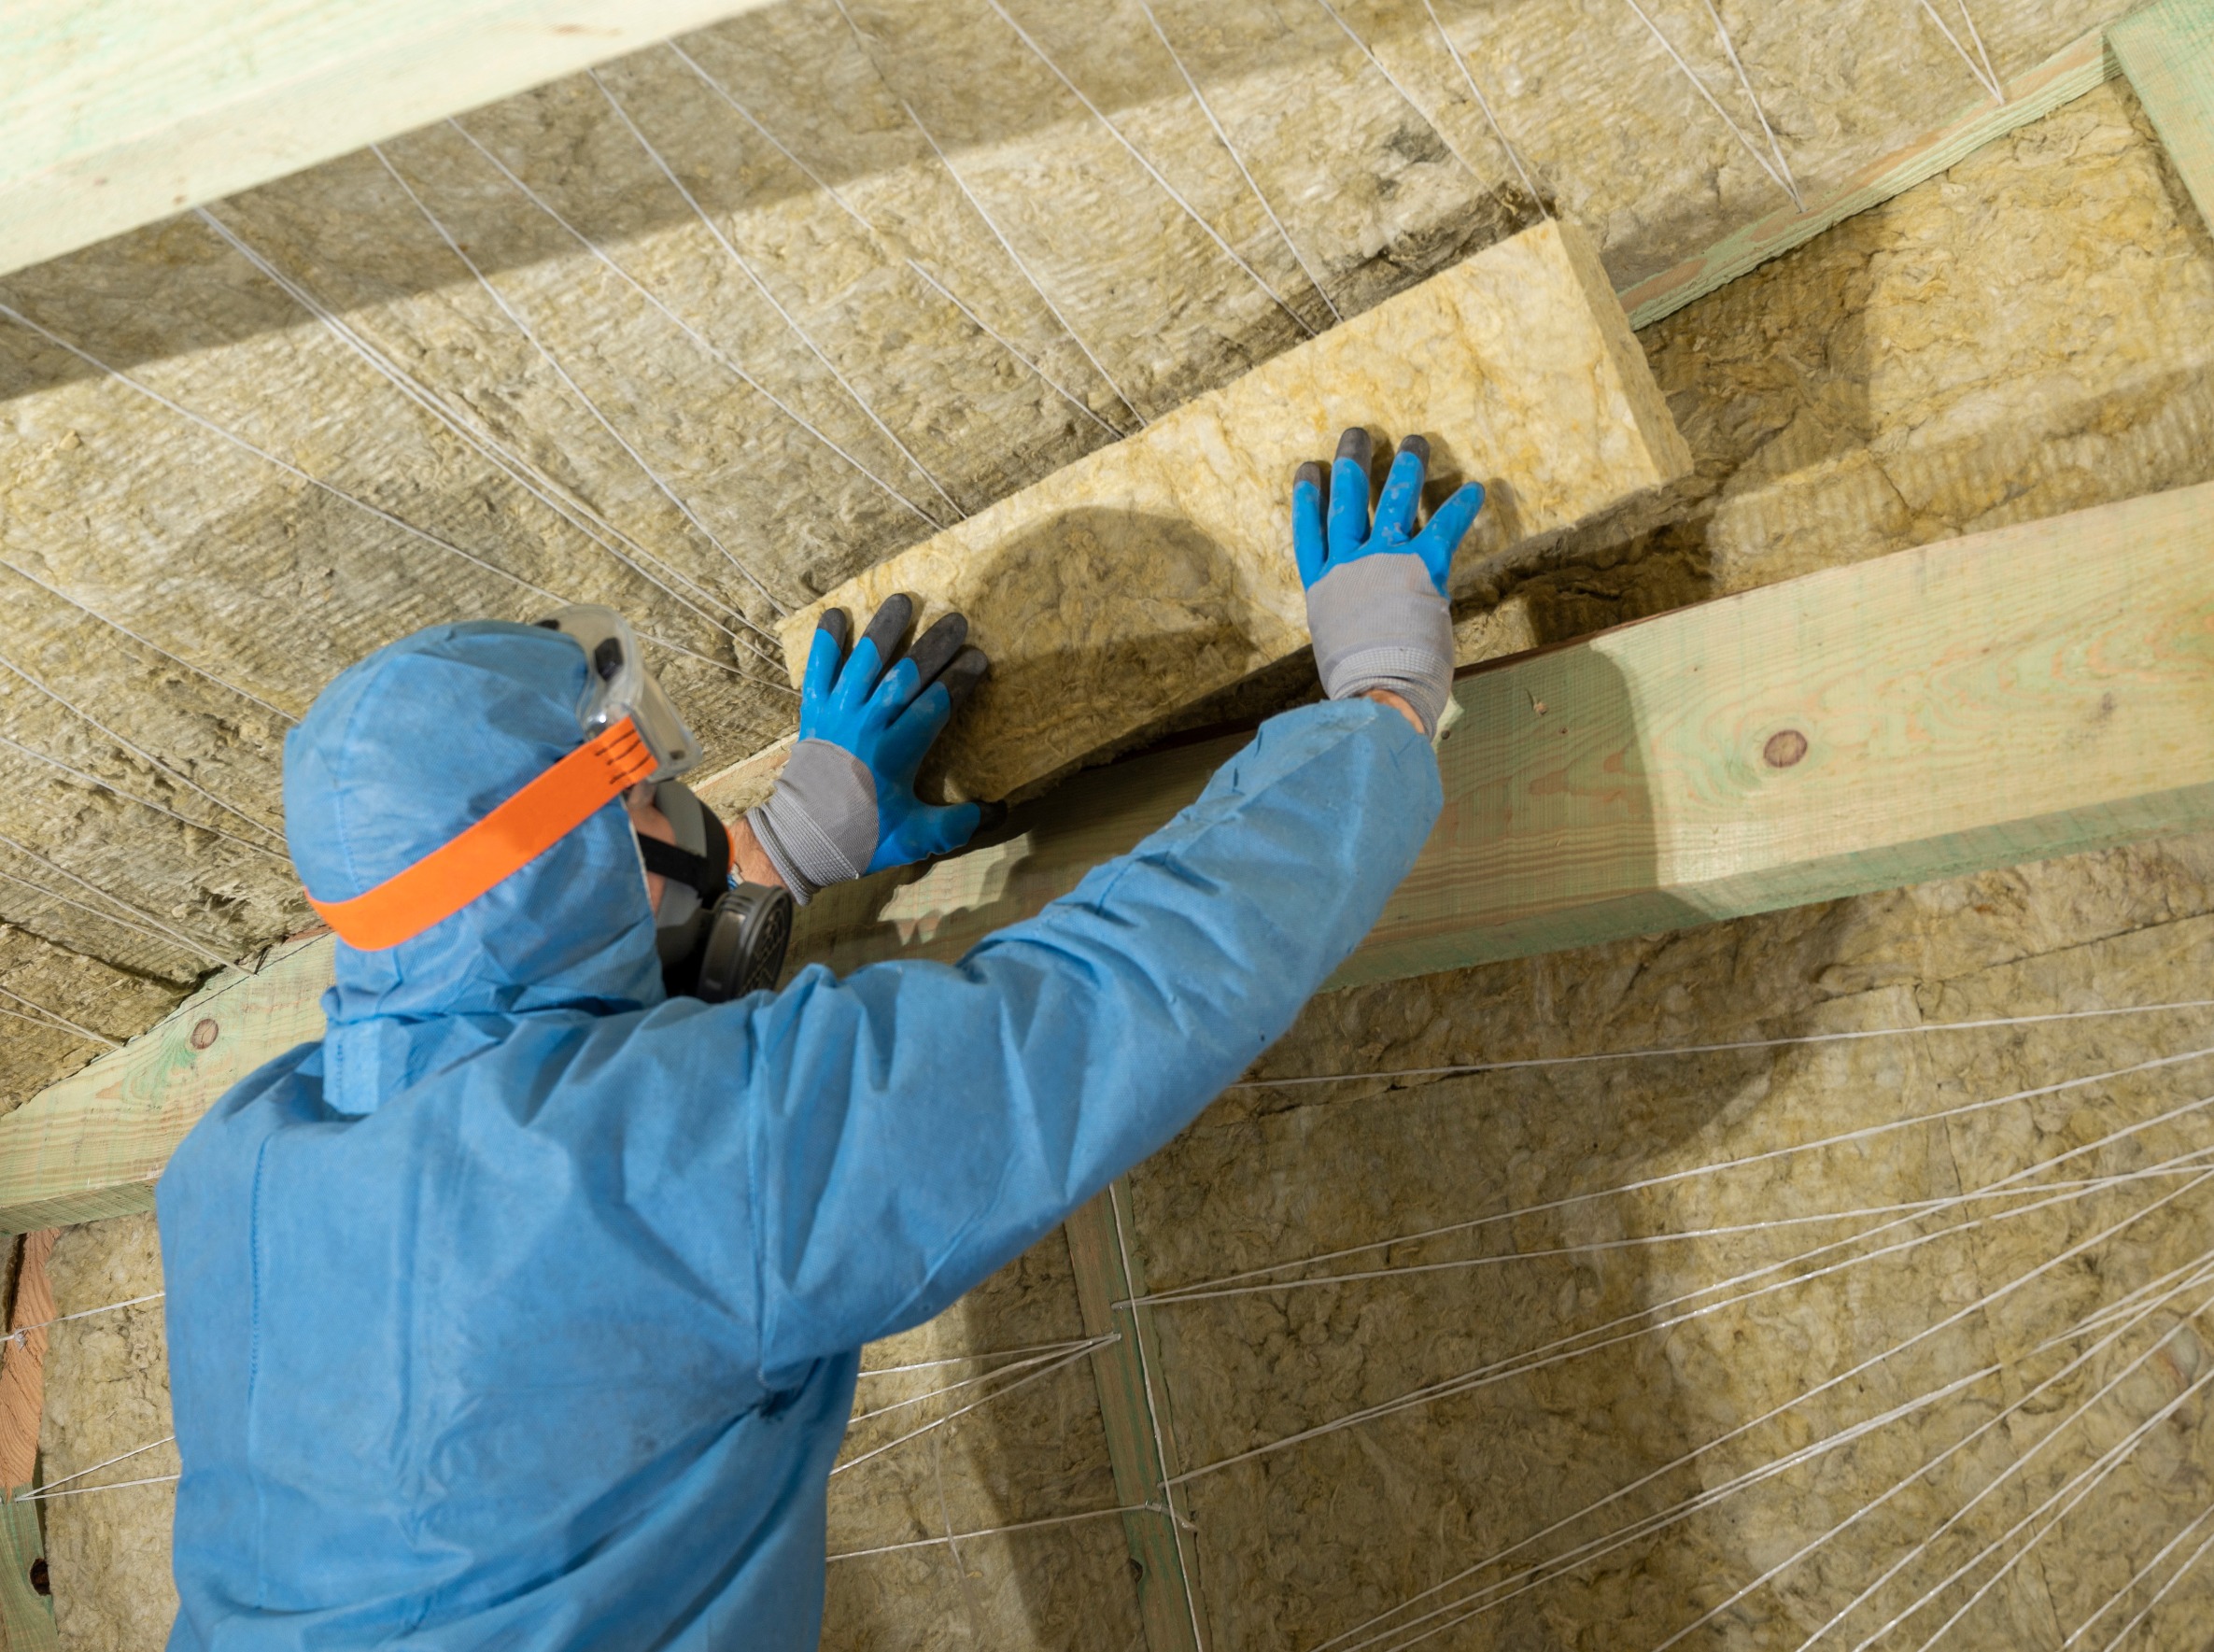 professional removing Asbestos containing insulation material